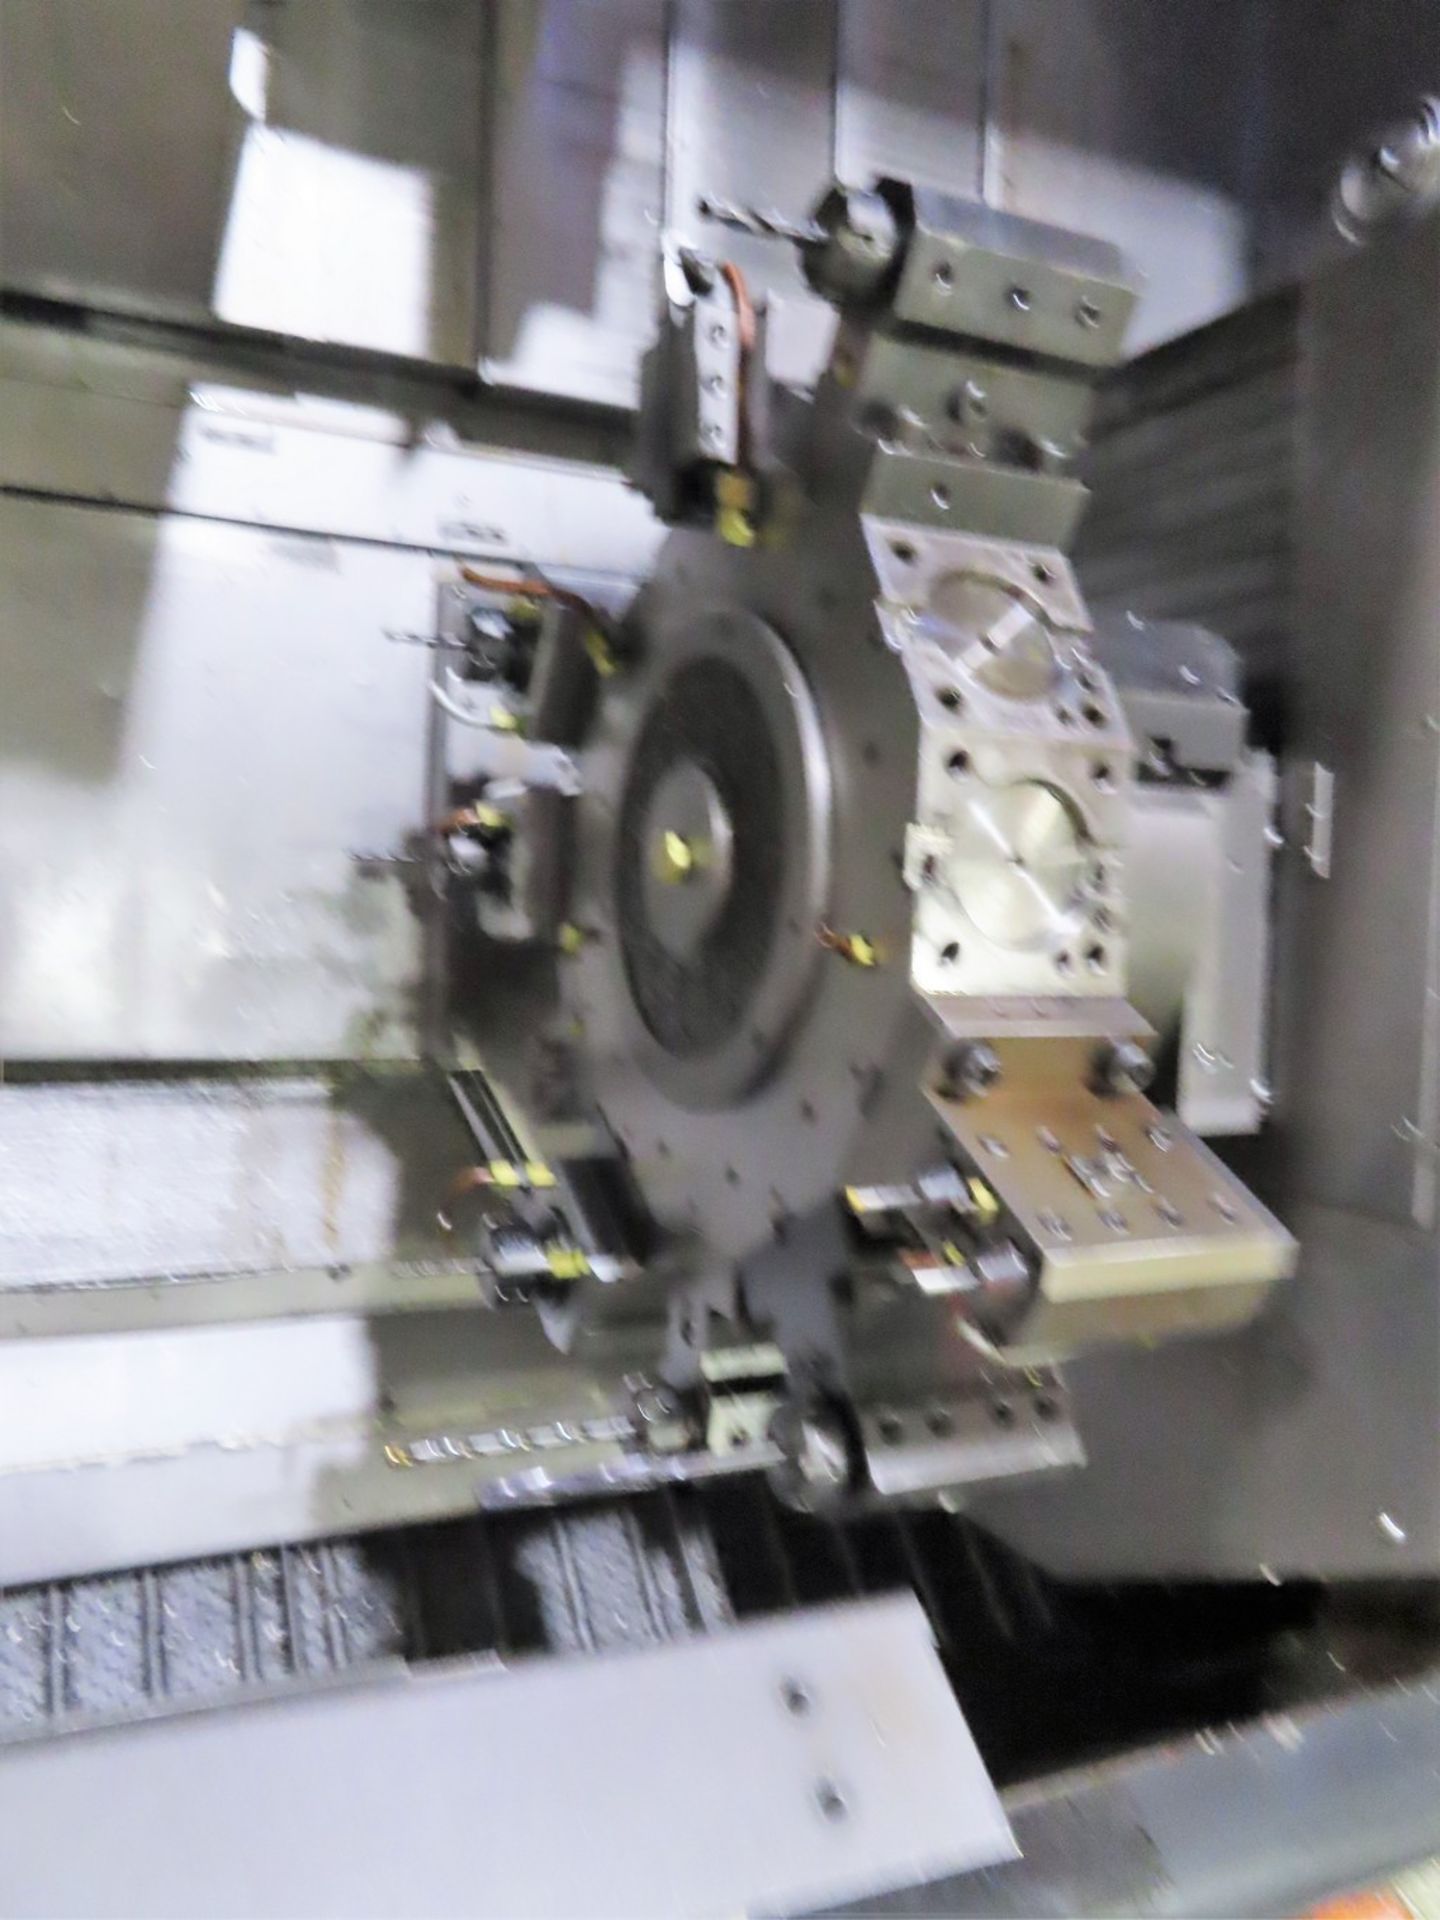 2011 Nakamura Tome WT-300 8-Axis CNC Turning/Milling Center, S/N M302803 - Image 10 of 18